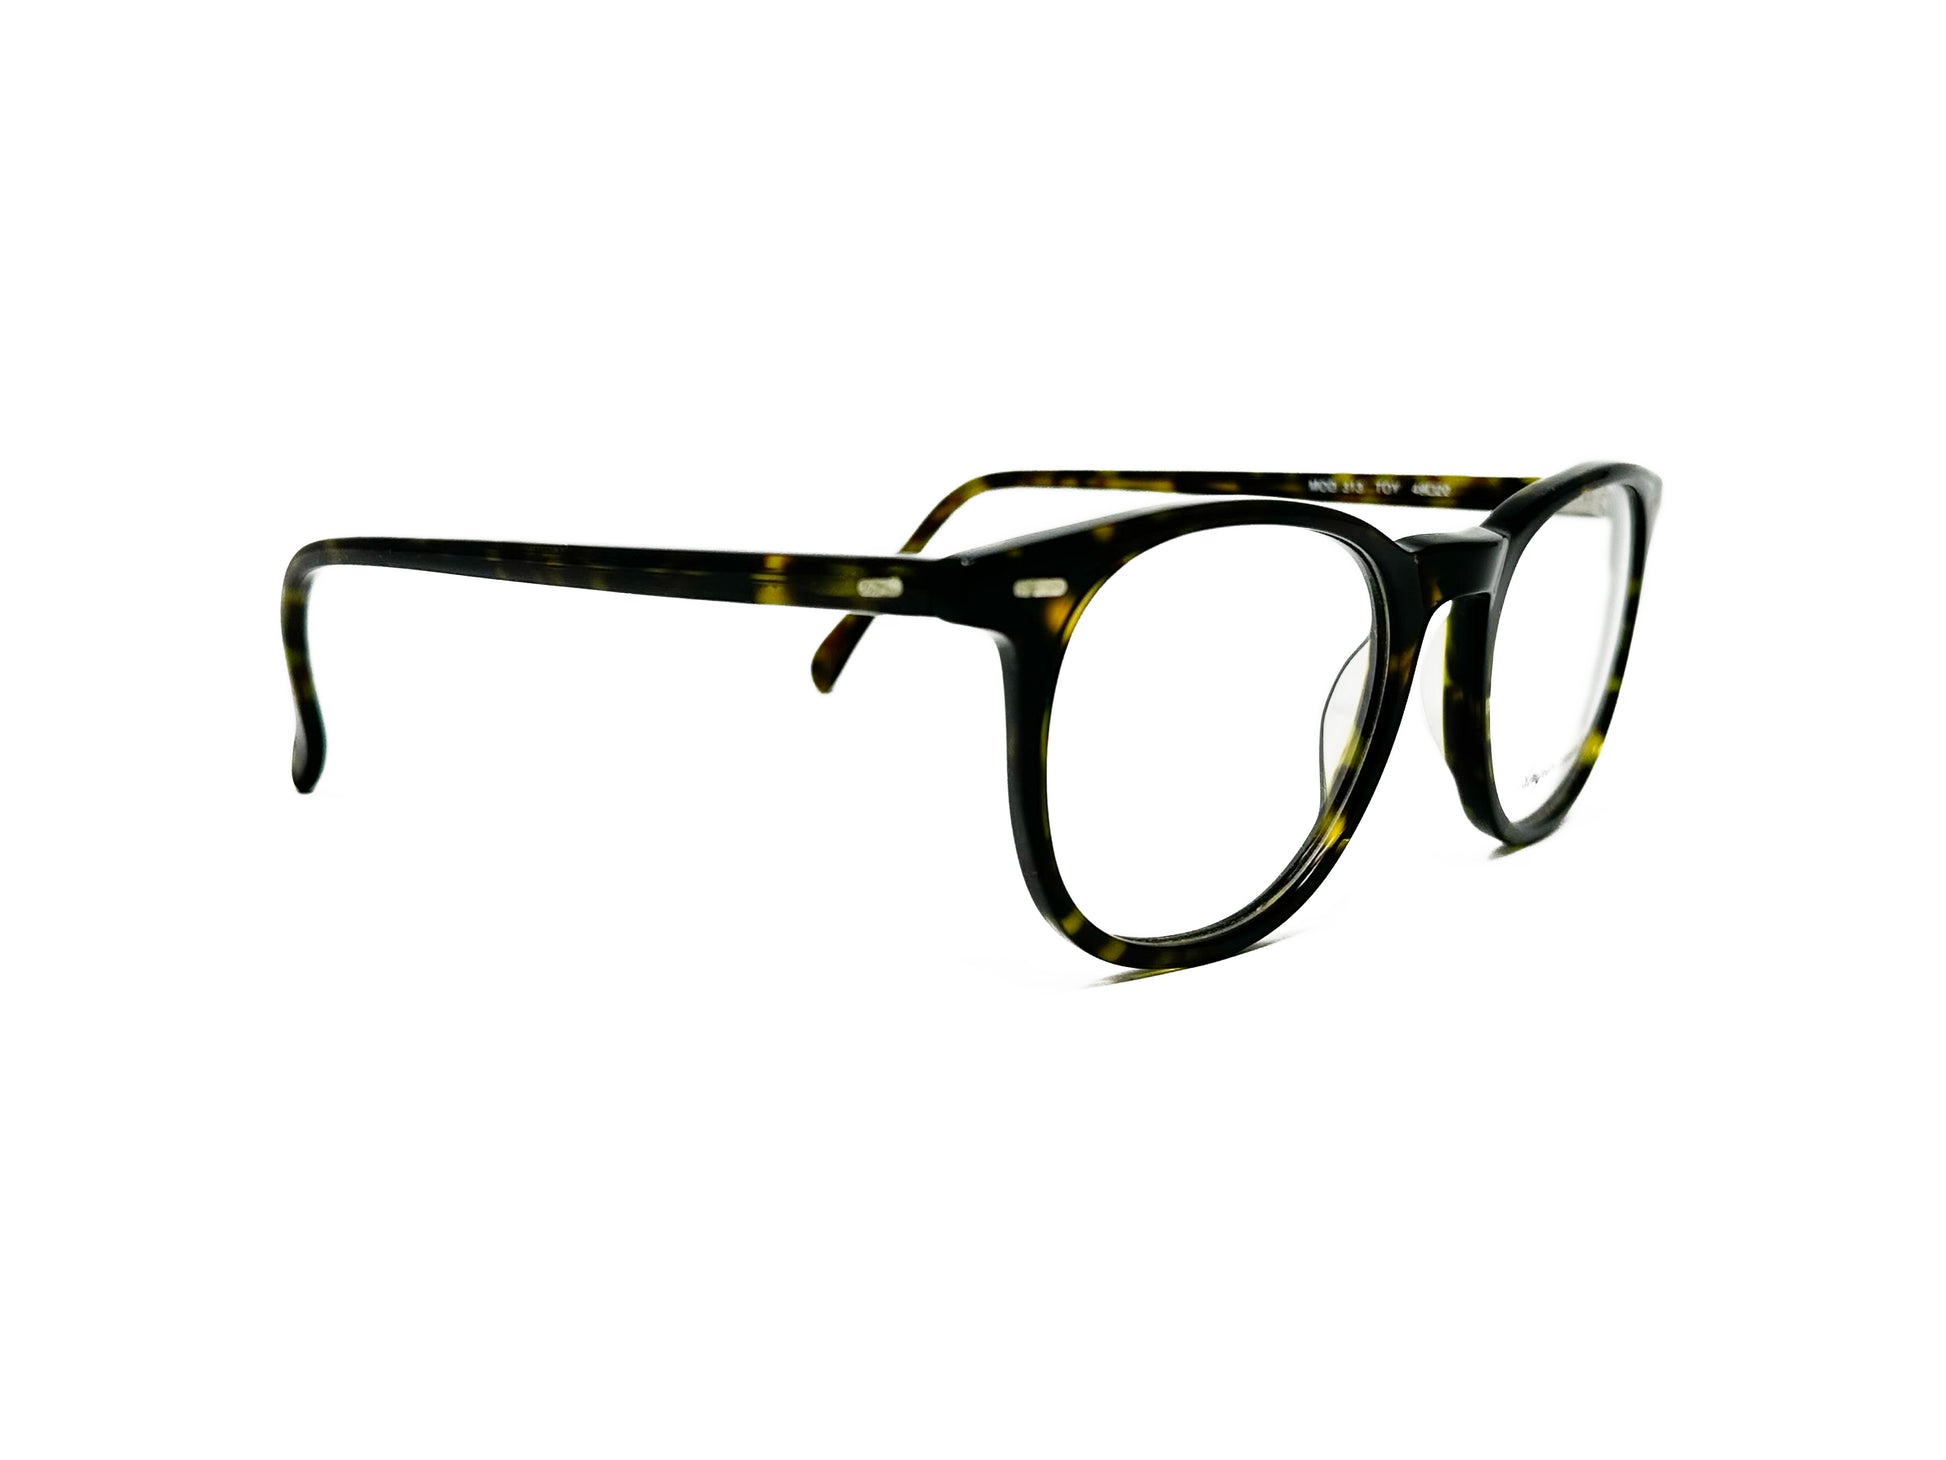 Anglo American Optical rounded-square, acetate, optical frame. Model: 313. Color: TOY - Tortoise. Side view.